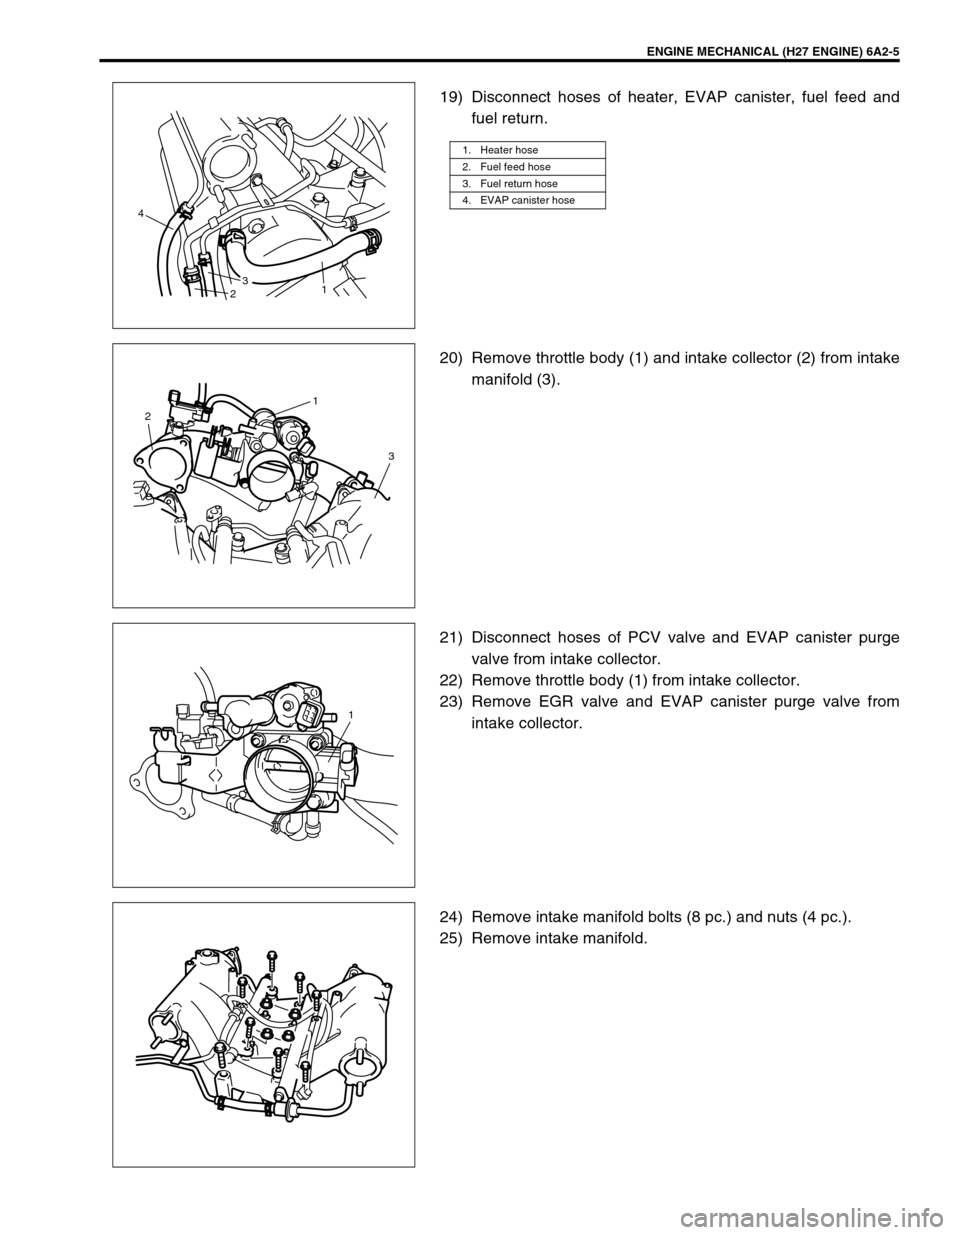 SUZUKI GRAND VITARA 1999 2.G Owners Manual ENGINE MECHANICAL (H27 ENGINE) 6A2-5
19) Disconnect hoses of heater, EVAP canister, fuel feed and
fuel return.
20) Remove throttle body (1) and intake collector (2) from intake
manifold (3).
21) Disco